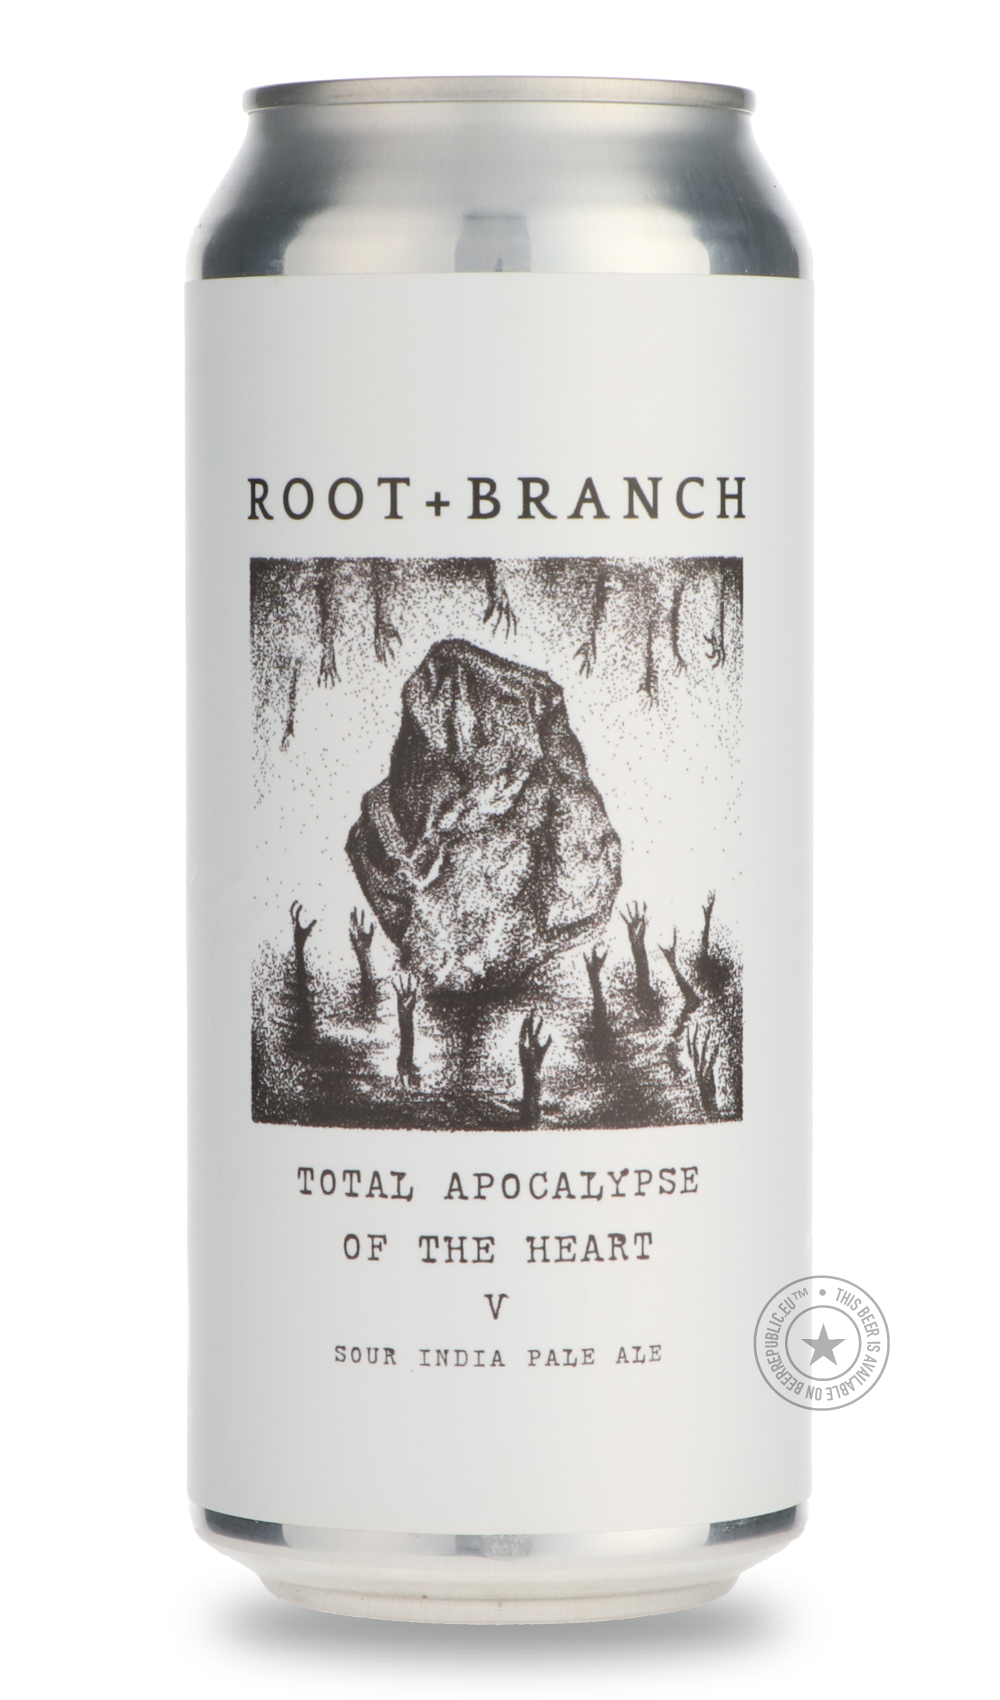 -Root + Branch- Total Apocalypse of the Heart V-IPA- Only @ Beer Republic - The best online beer store for American & Canadian craft beer - Buy beer online from the USA and Canada - Bier online kopen - Amerikaans bier kopen - Craft beer store - Craft beer kopen - Amerikanisch bier kaufen - Bier online kaufen - Acheter biere online - IPA - Stout - Porter - New England IPA - Hazy IPA - Imperial Stout - Barrel Aged - Barrel Aged Imperial Stout - Brown - Dark beer - Blond - Blonde - Pilsner - Lager - Wheat - We